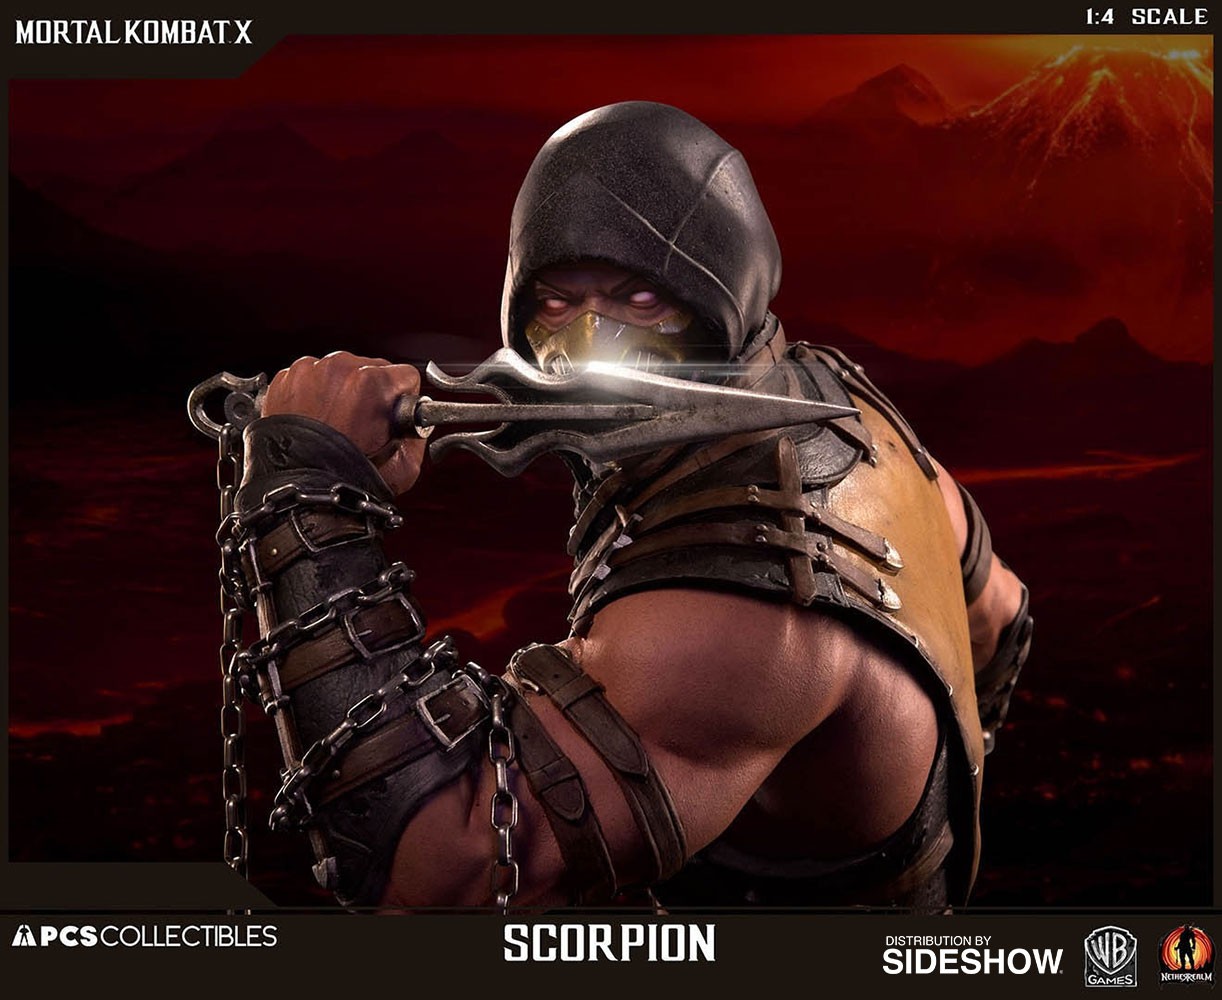 Scorpion Collector Edition View 8